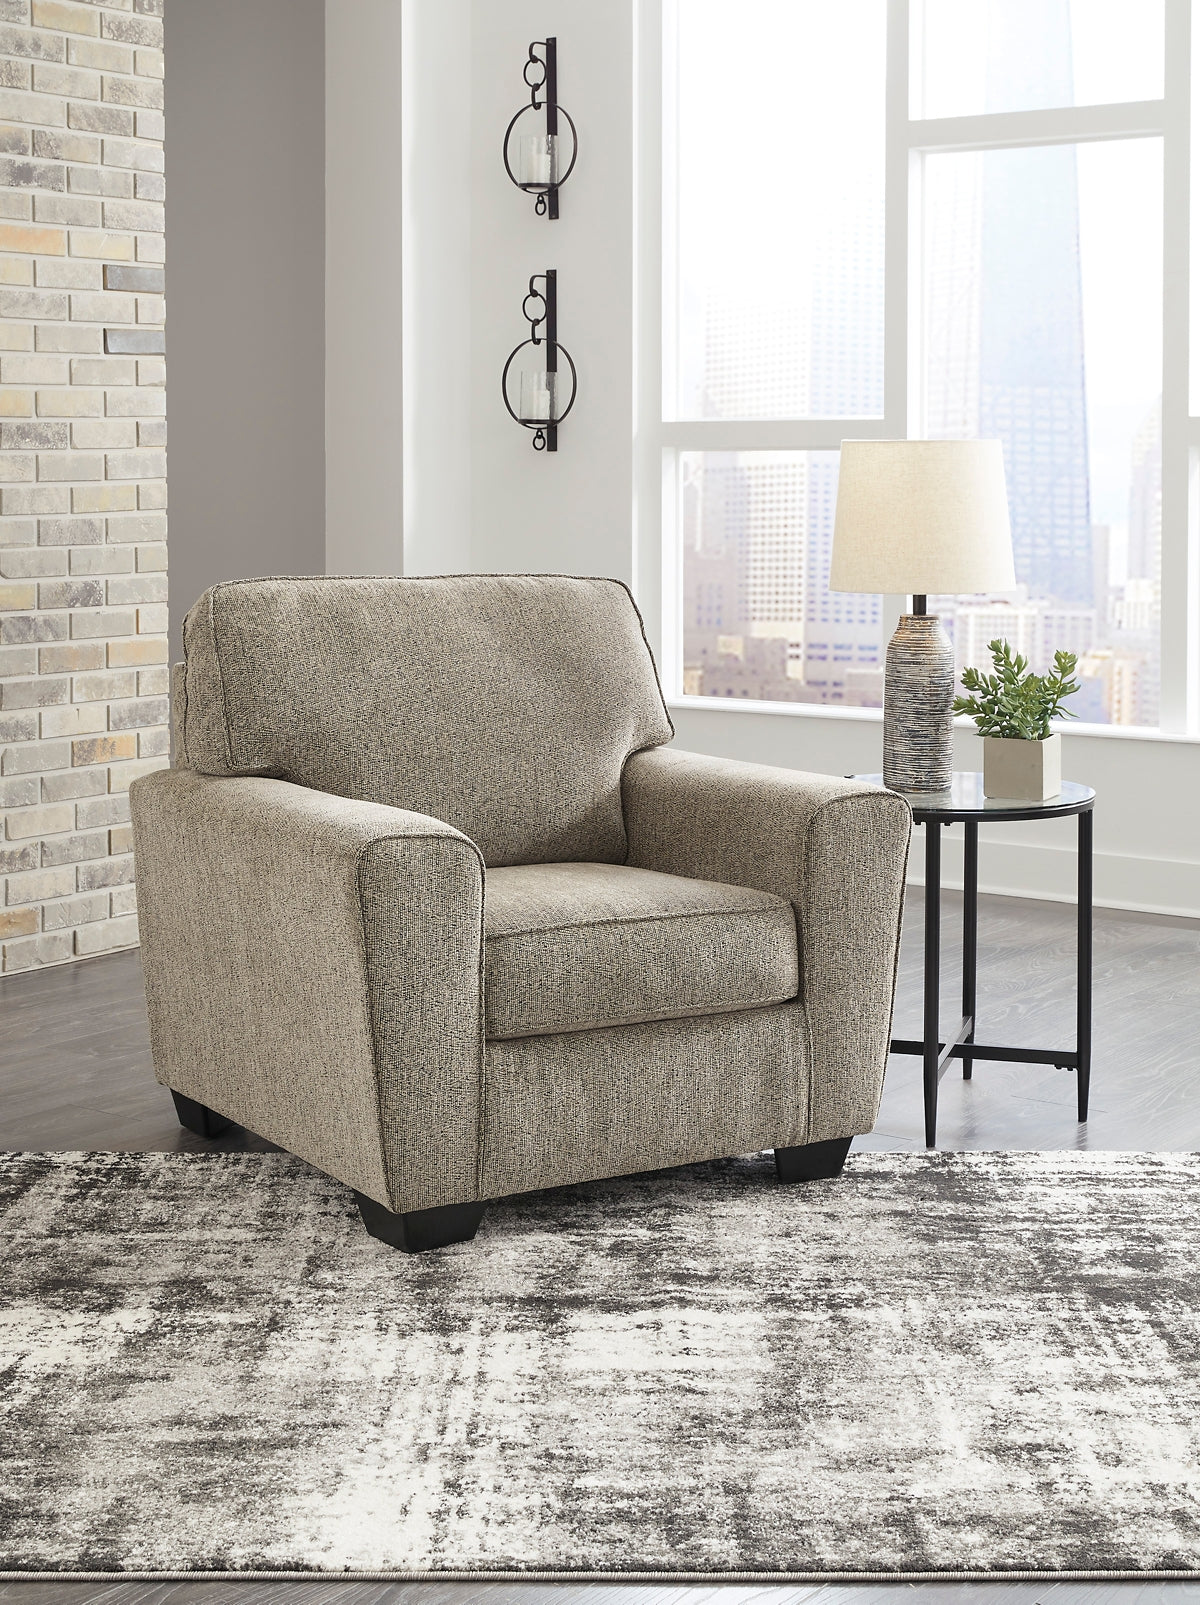 McCluer Chair Smyrna Furniture Outlet